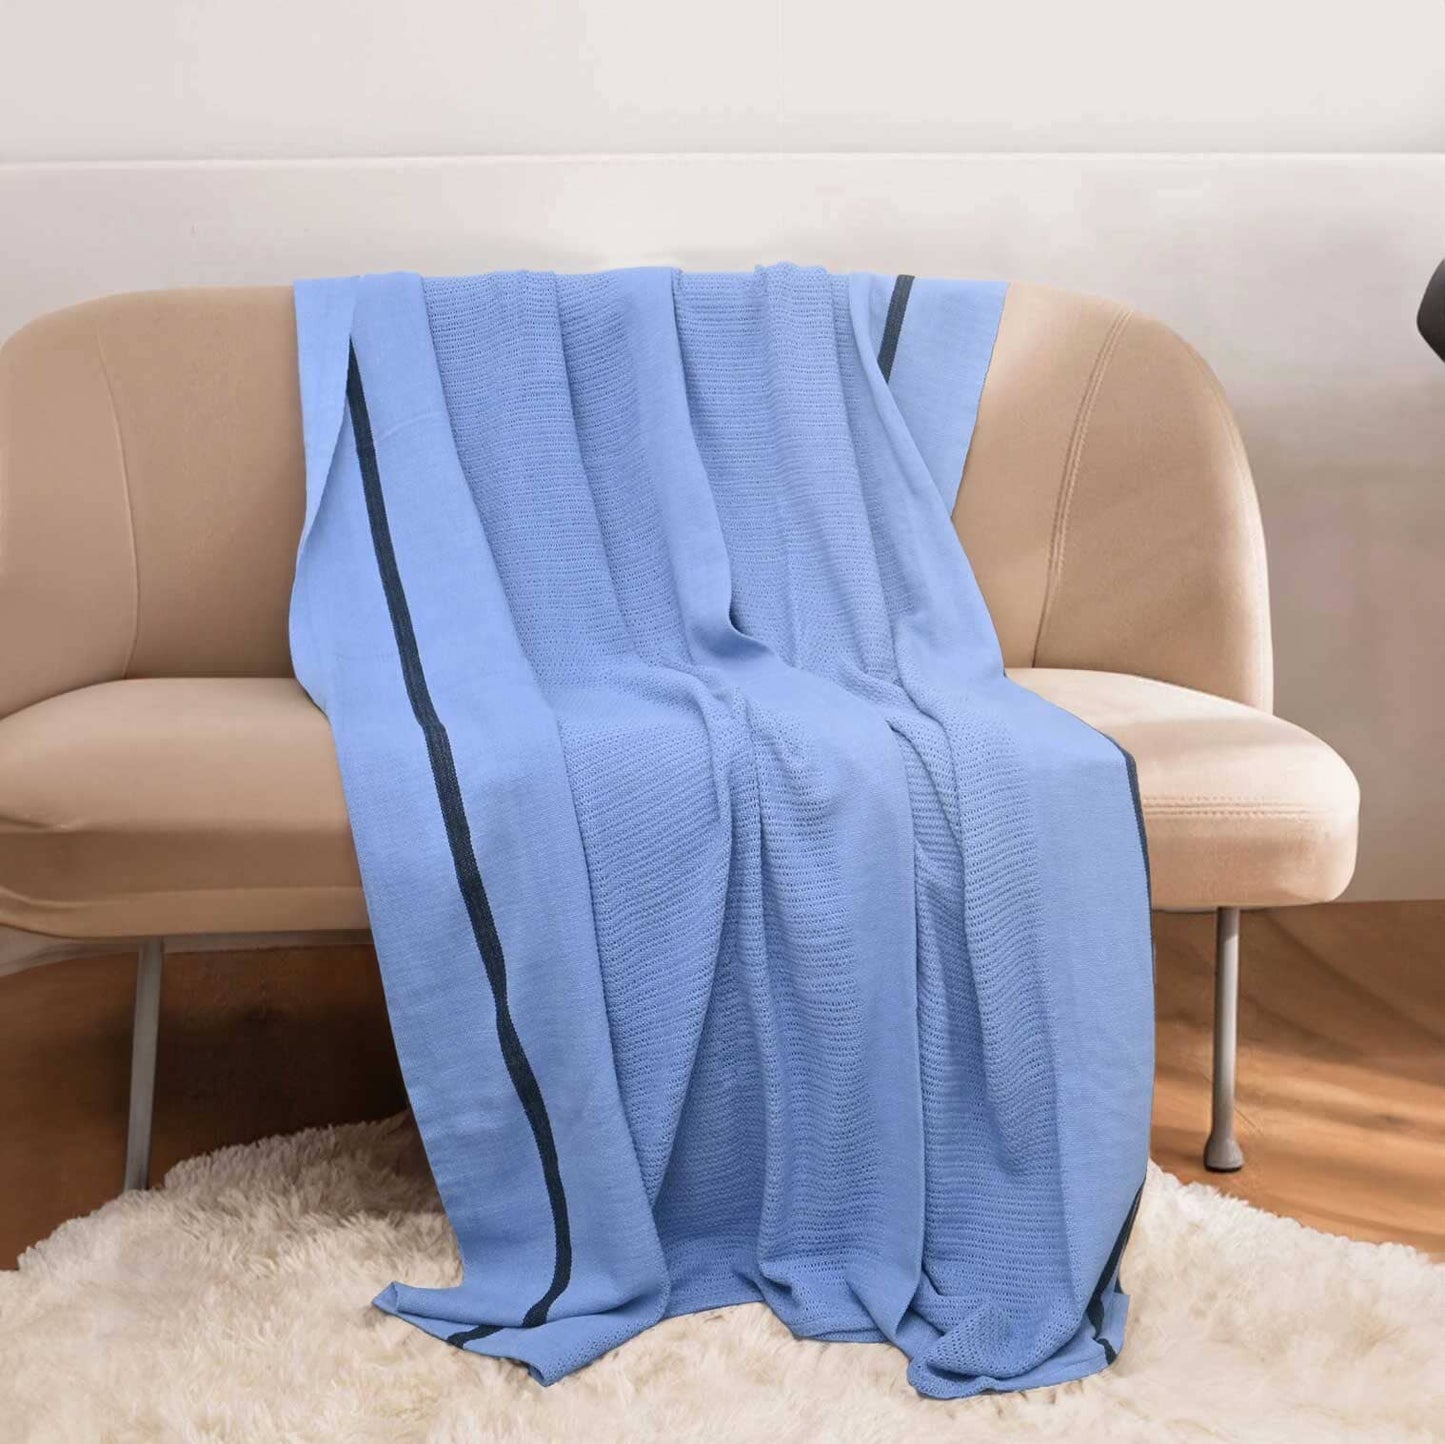 Luxurious Cozy Knitted Throw Blanket Blanket MB Traders Powder Blue 